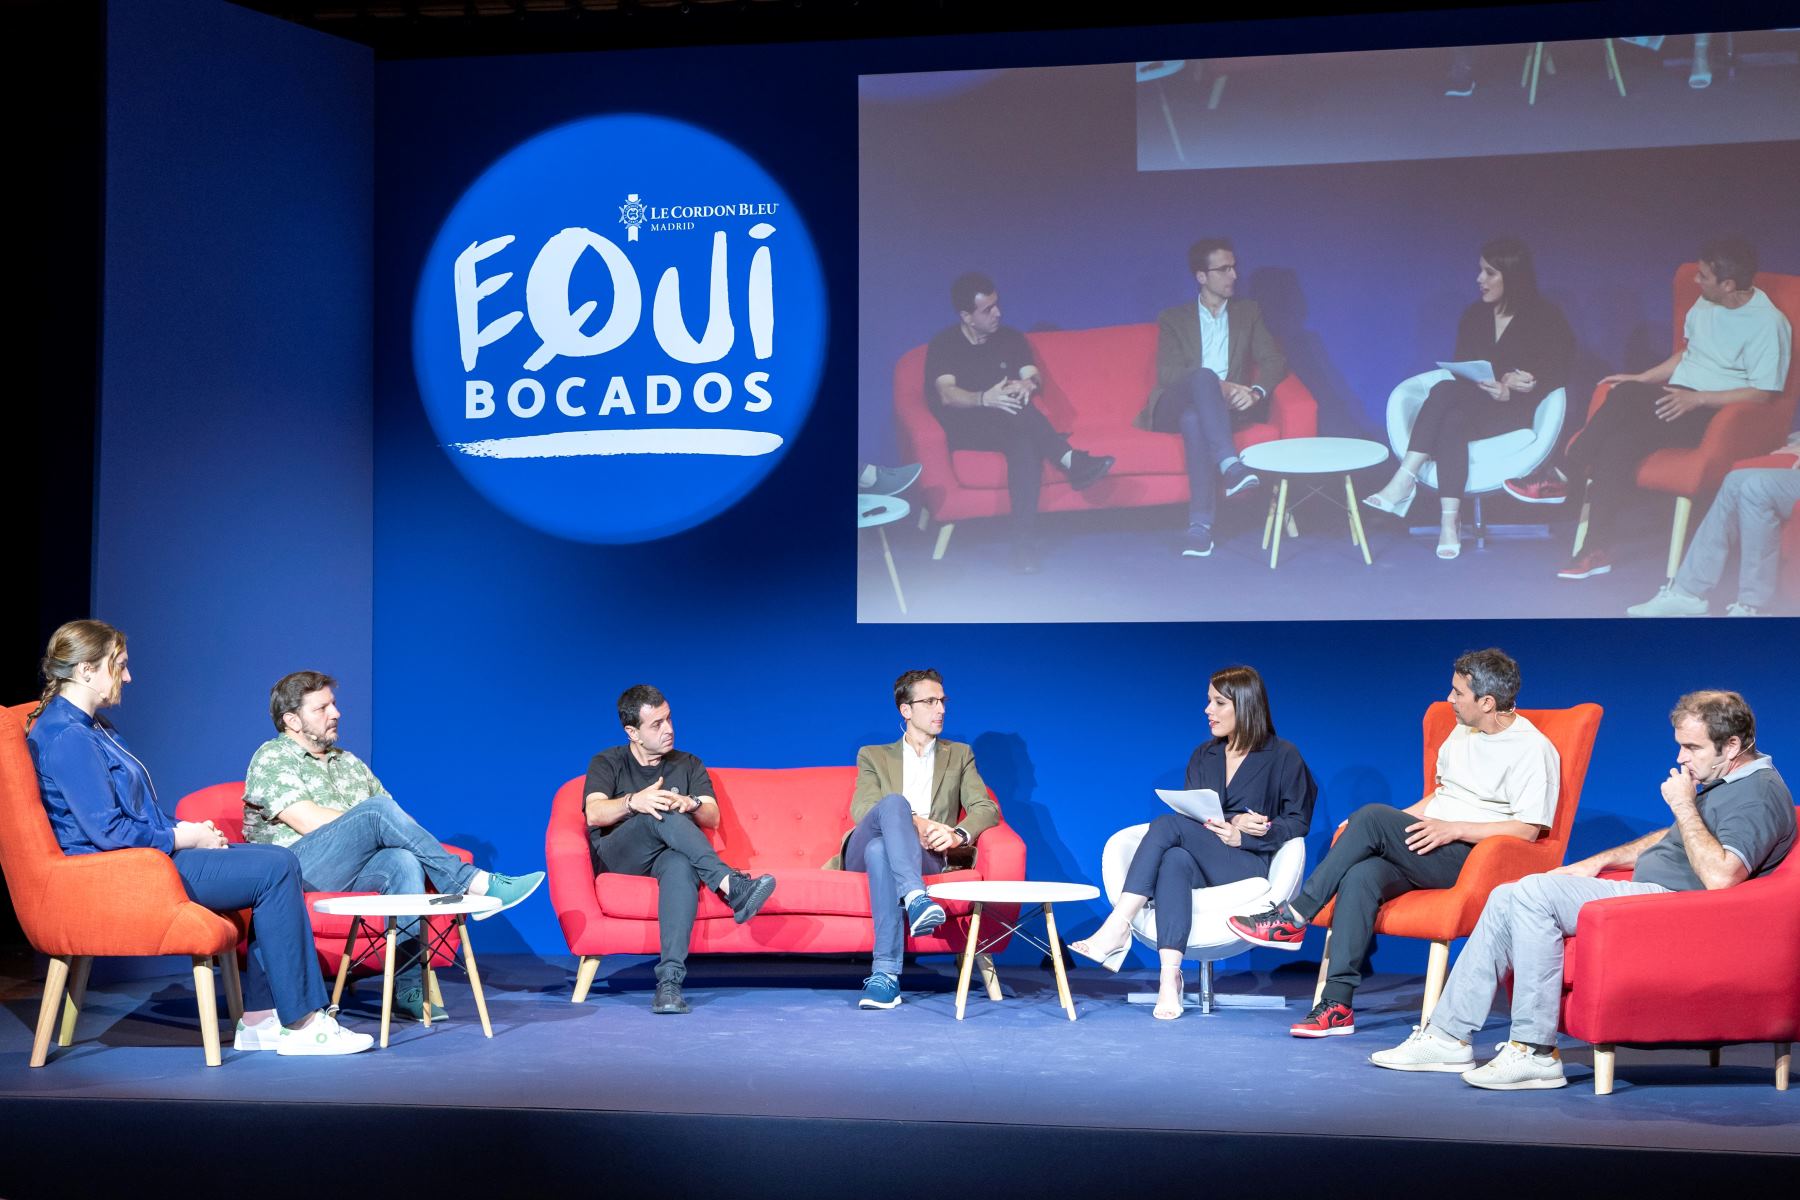 Le Cordon Bleu Madrid presented the first episode of 'Equibocados', a documentary that normalises mistakes in the learning process